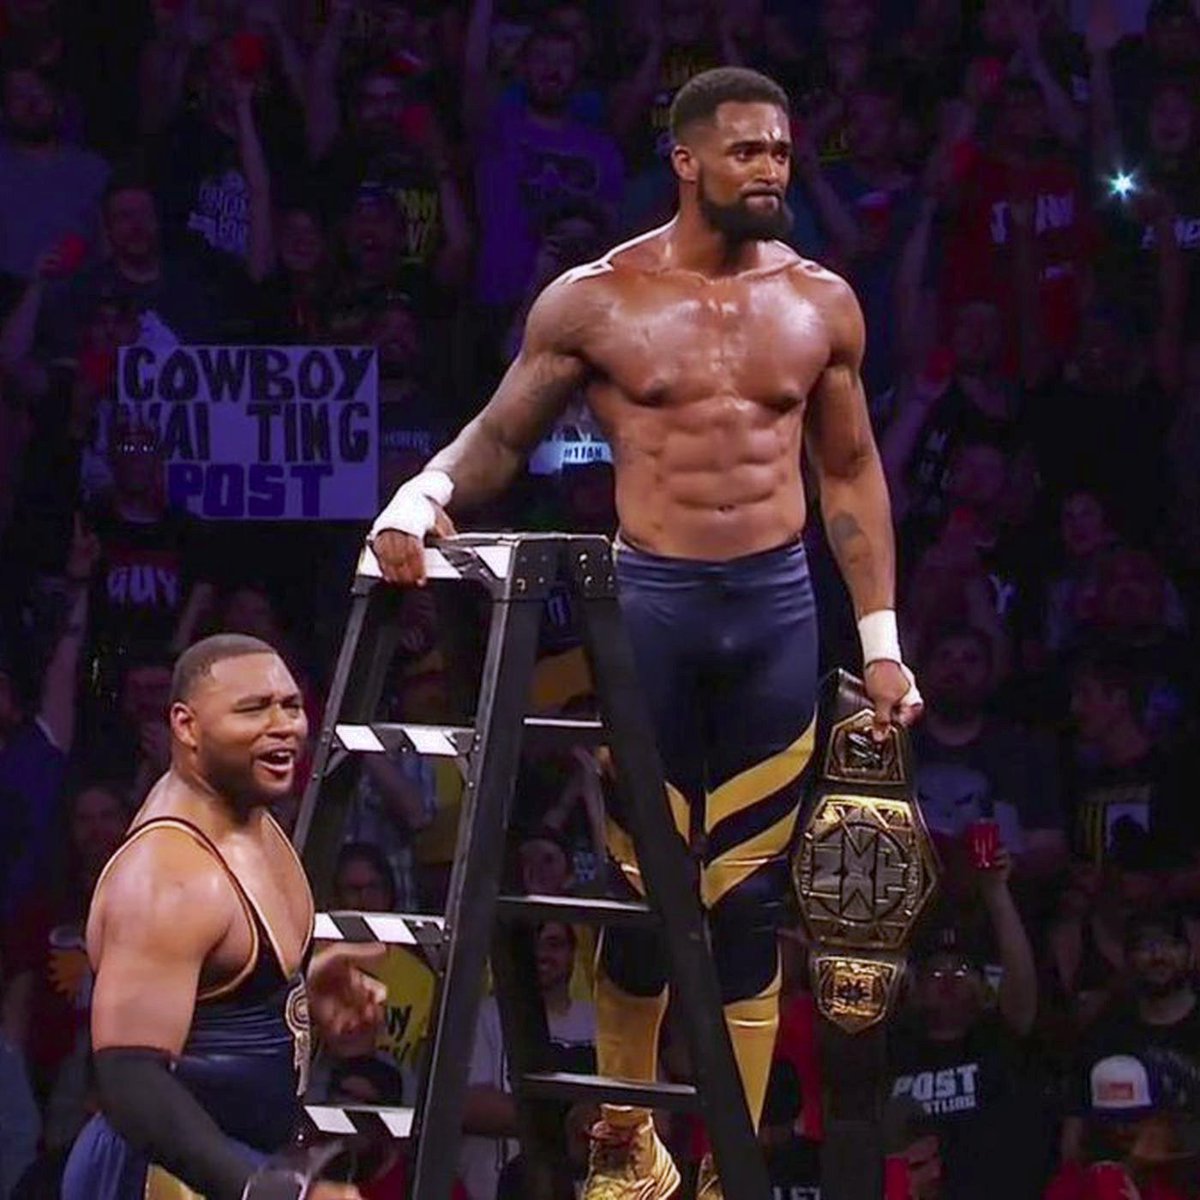 6/1/2019

The Street Profits won the vacant NXT Tag Team Championship in a Ladder Match at TakeOver XXV from the Webster Bank Arena in Bridgeport, Connecticut.

#WWE #WWENXT #StreetProfits #OneyLorcan #DannyBurch #UndisputedEra #ForgottenSons #LadderMatch #NXTTageTeamChampionship